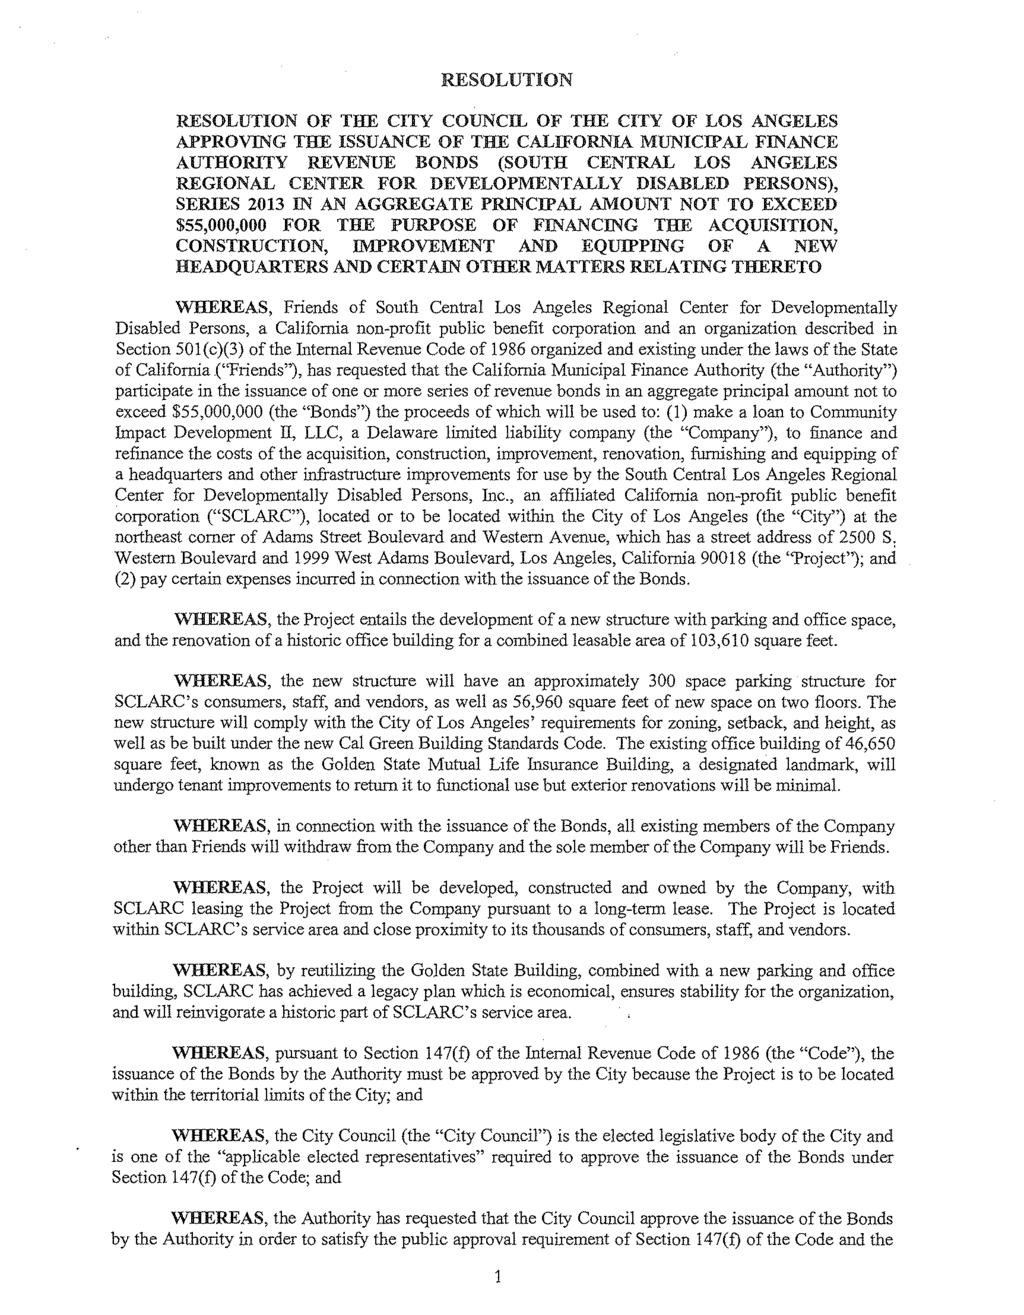 RESOLUTION RESOLUTION OF THE CITY COUNCIL OF THE CITY OF LOS ANGELES APPROVING THE ISSUANCE OF THE CALIFORNIA MUNICIPAL FINANCE AUTHORITY REVENUE BONDS (SOUTH CENTRAL LOS ANGELES REGIONAL CENTER FOR